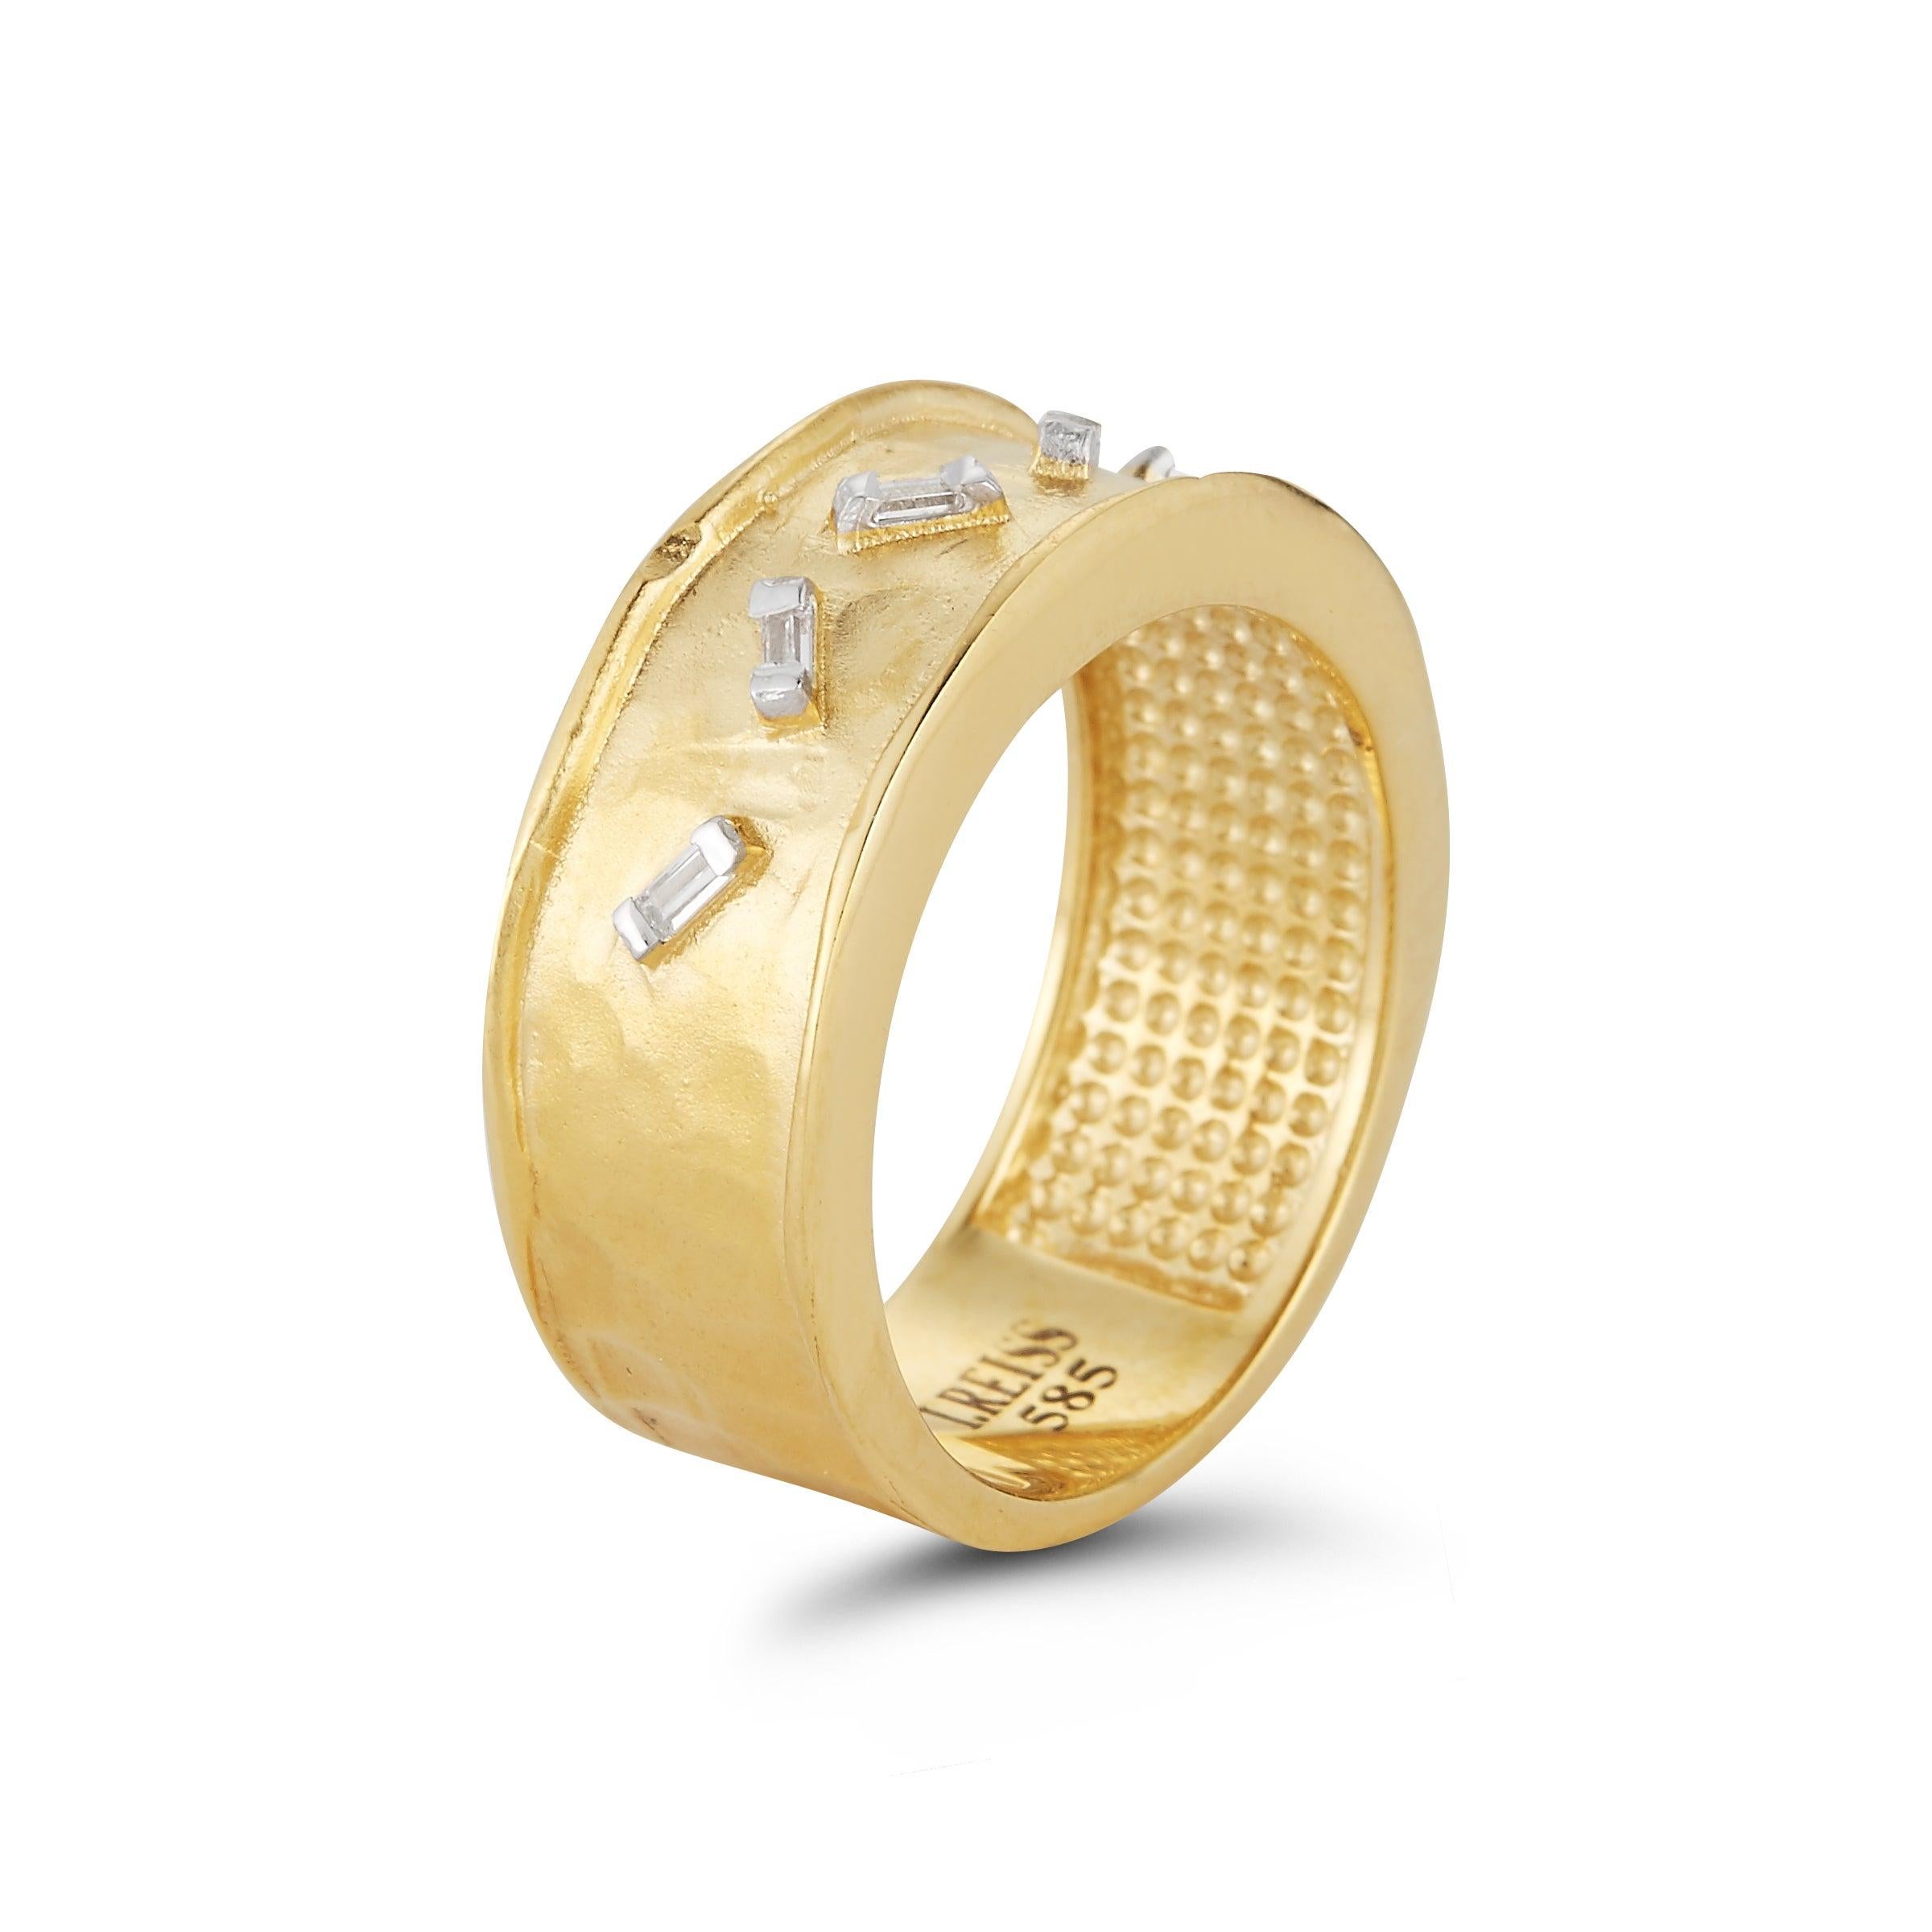 For Sale:  Handcrafted 14 Karat Yellow Gold Ring Set with Scattered Baguette Diamonds 2